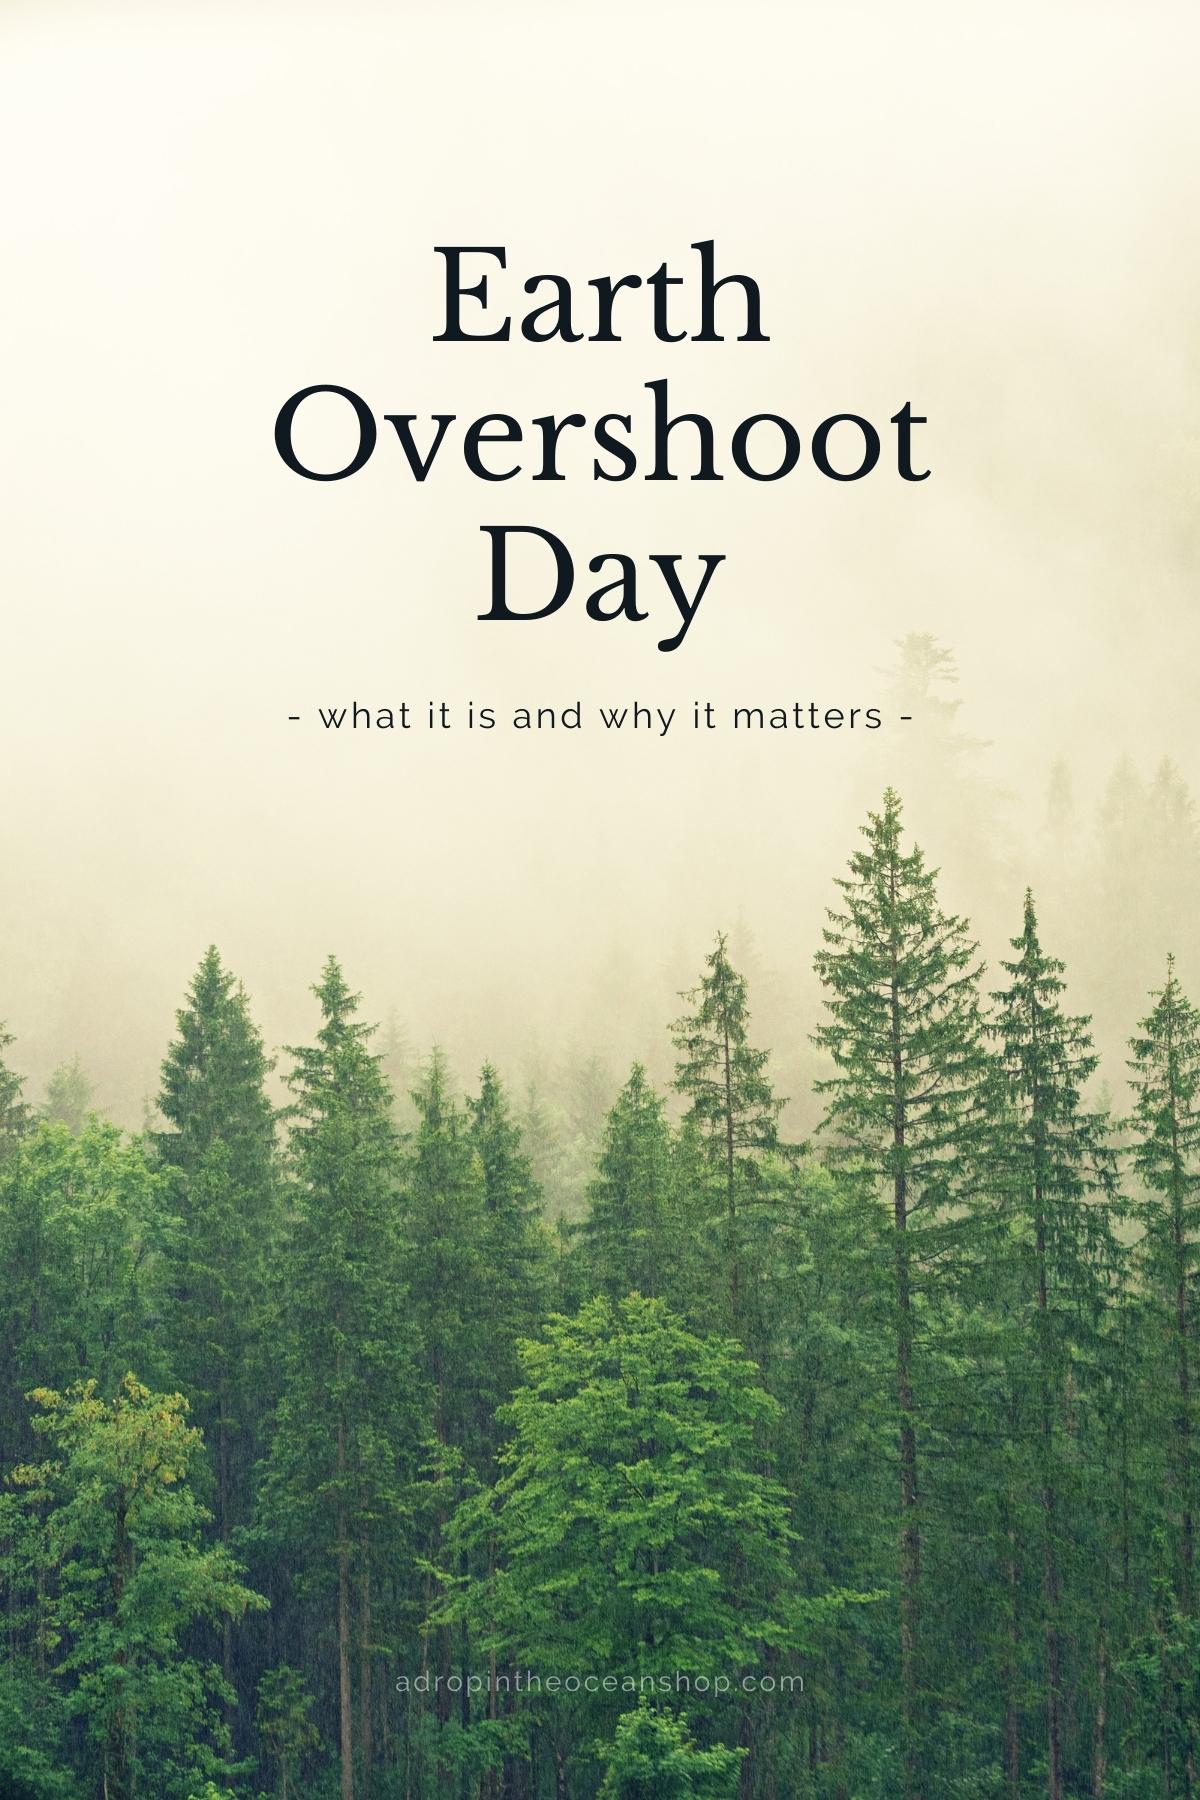 A Drop in the Ocean Shop What is Earth Overshoot Day and why does it matter?